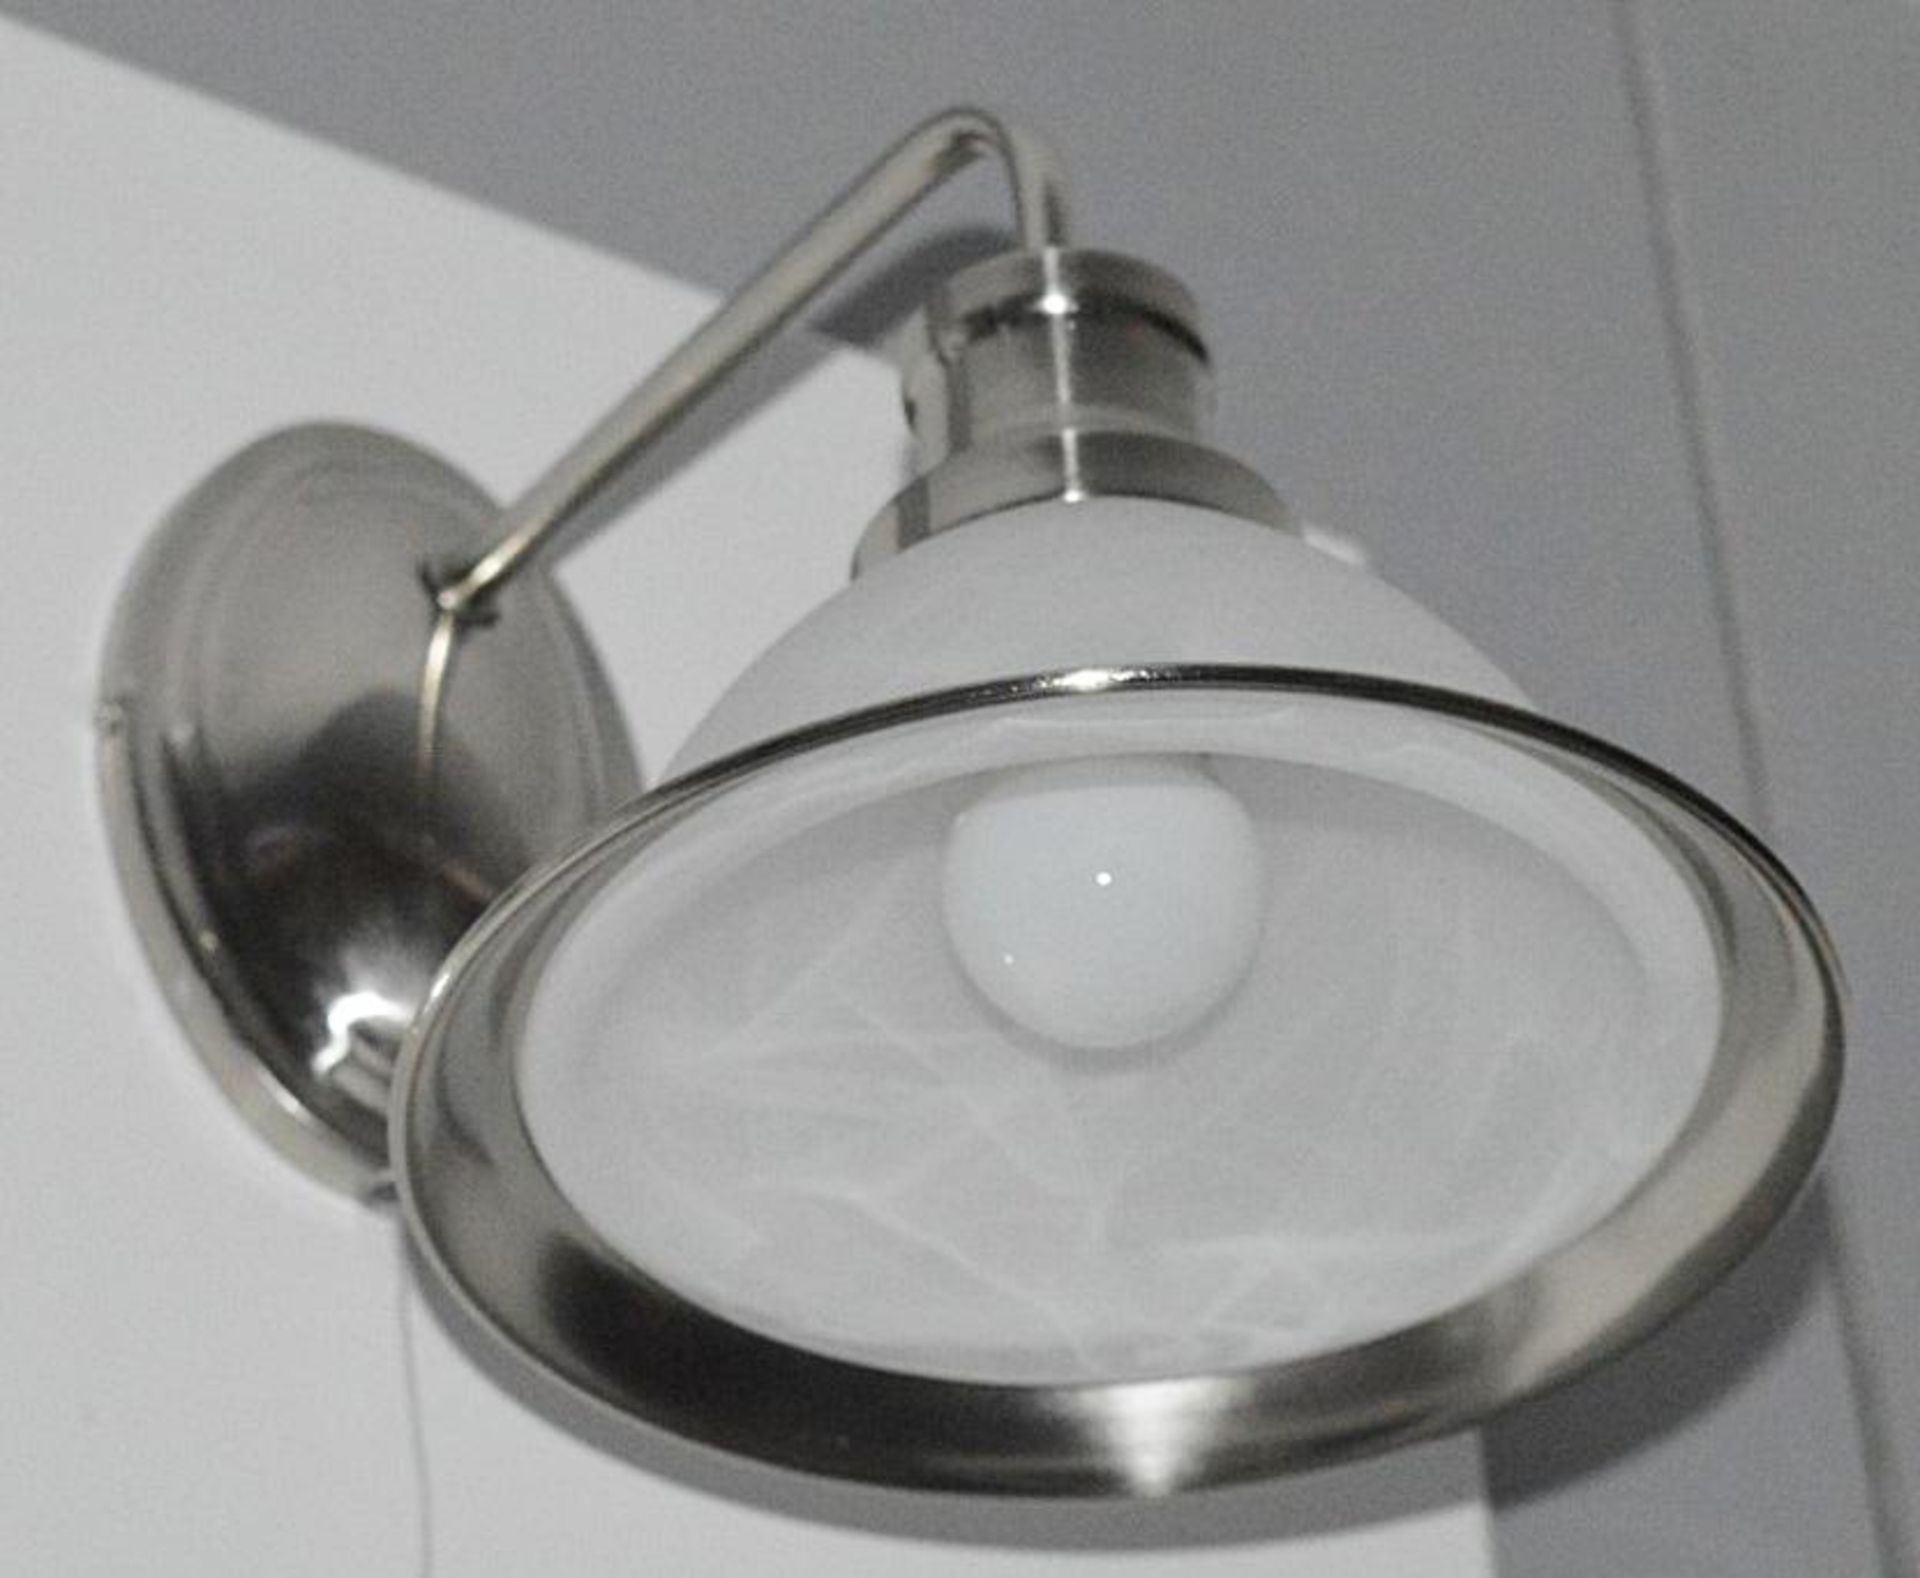 1 x Bistro Satin Silver Wall Light With Acid Glass Shade And Pull Cord - Ex Display Stock - CL298 - - Image 2 of 2